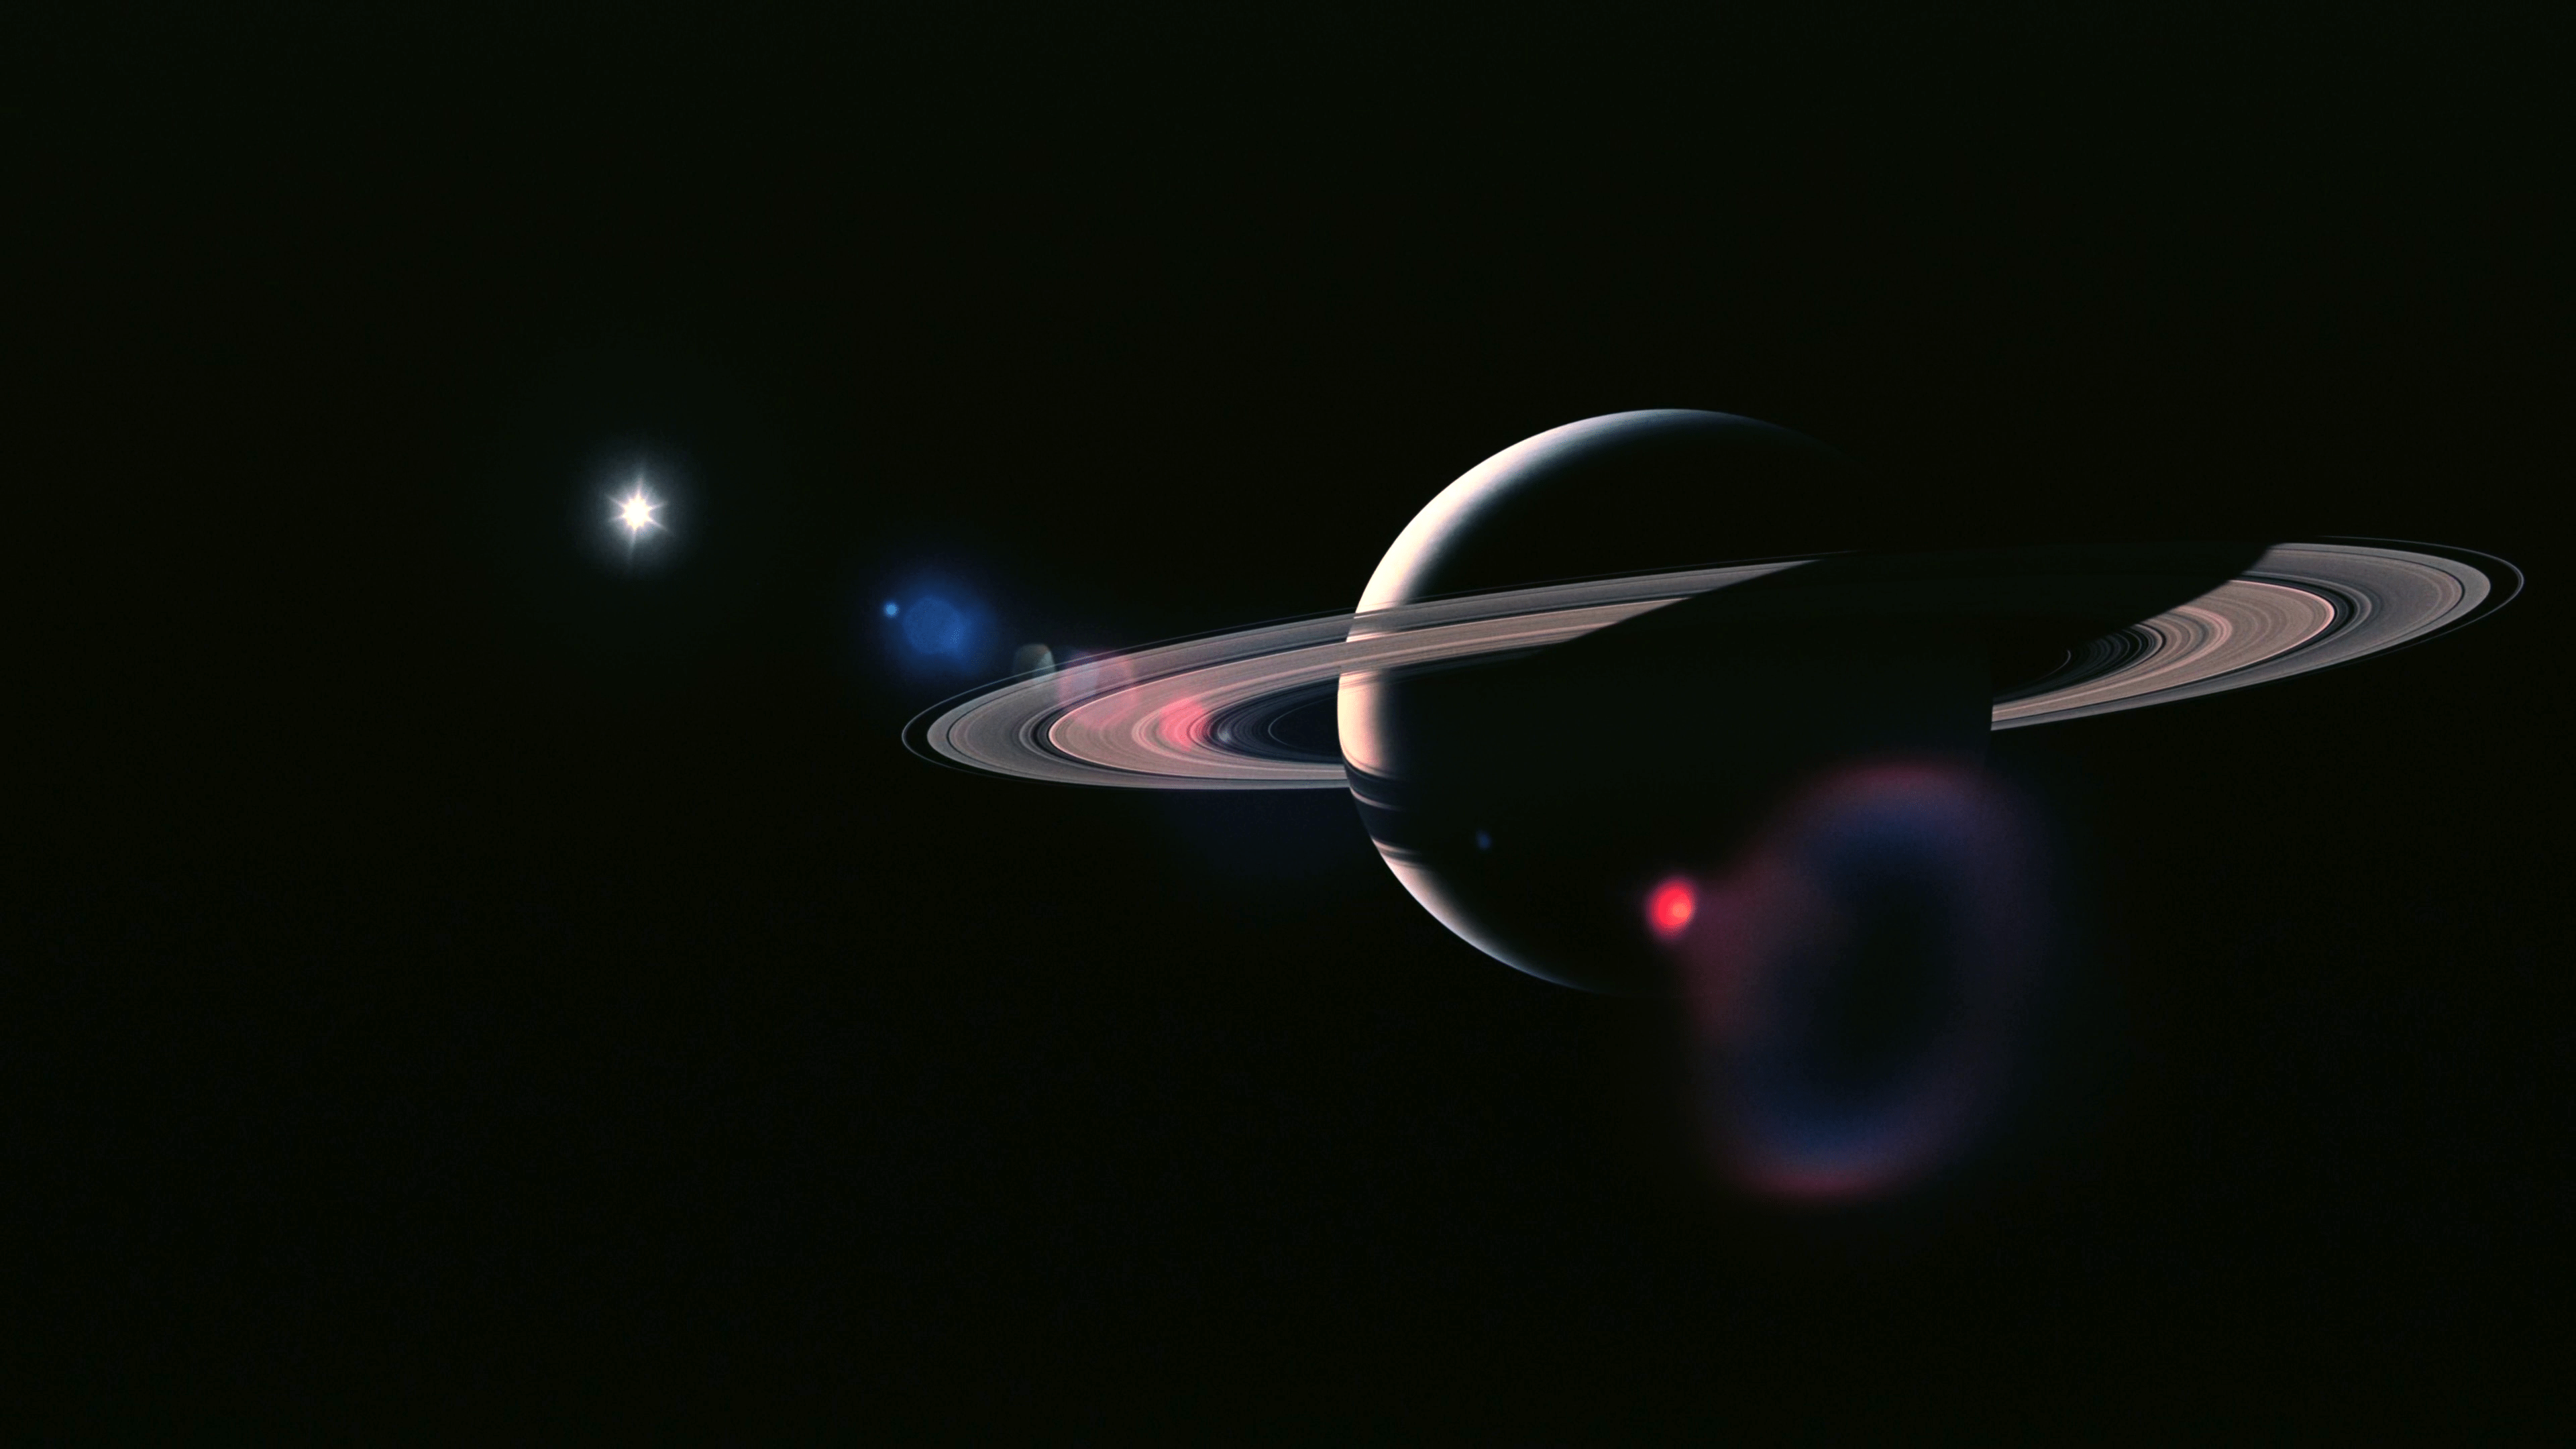 3840x2160 Saturn Wallpapers Top Free 3840x2160 Saturn Backgrounds Wallpaperaccess 7840